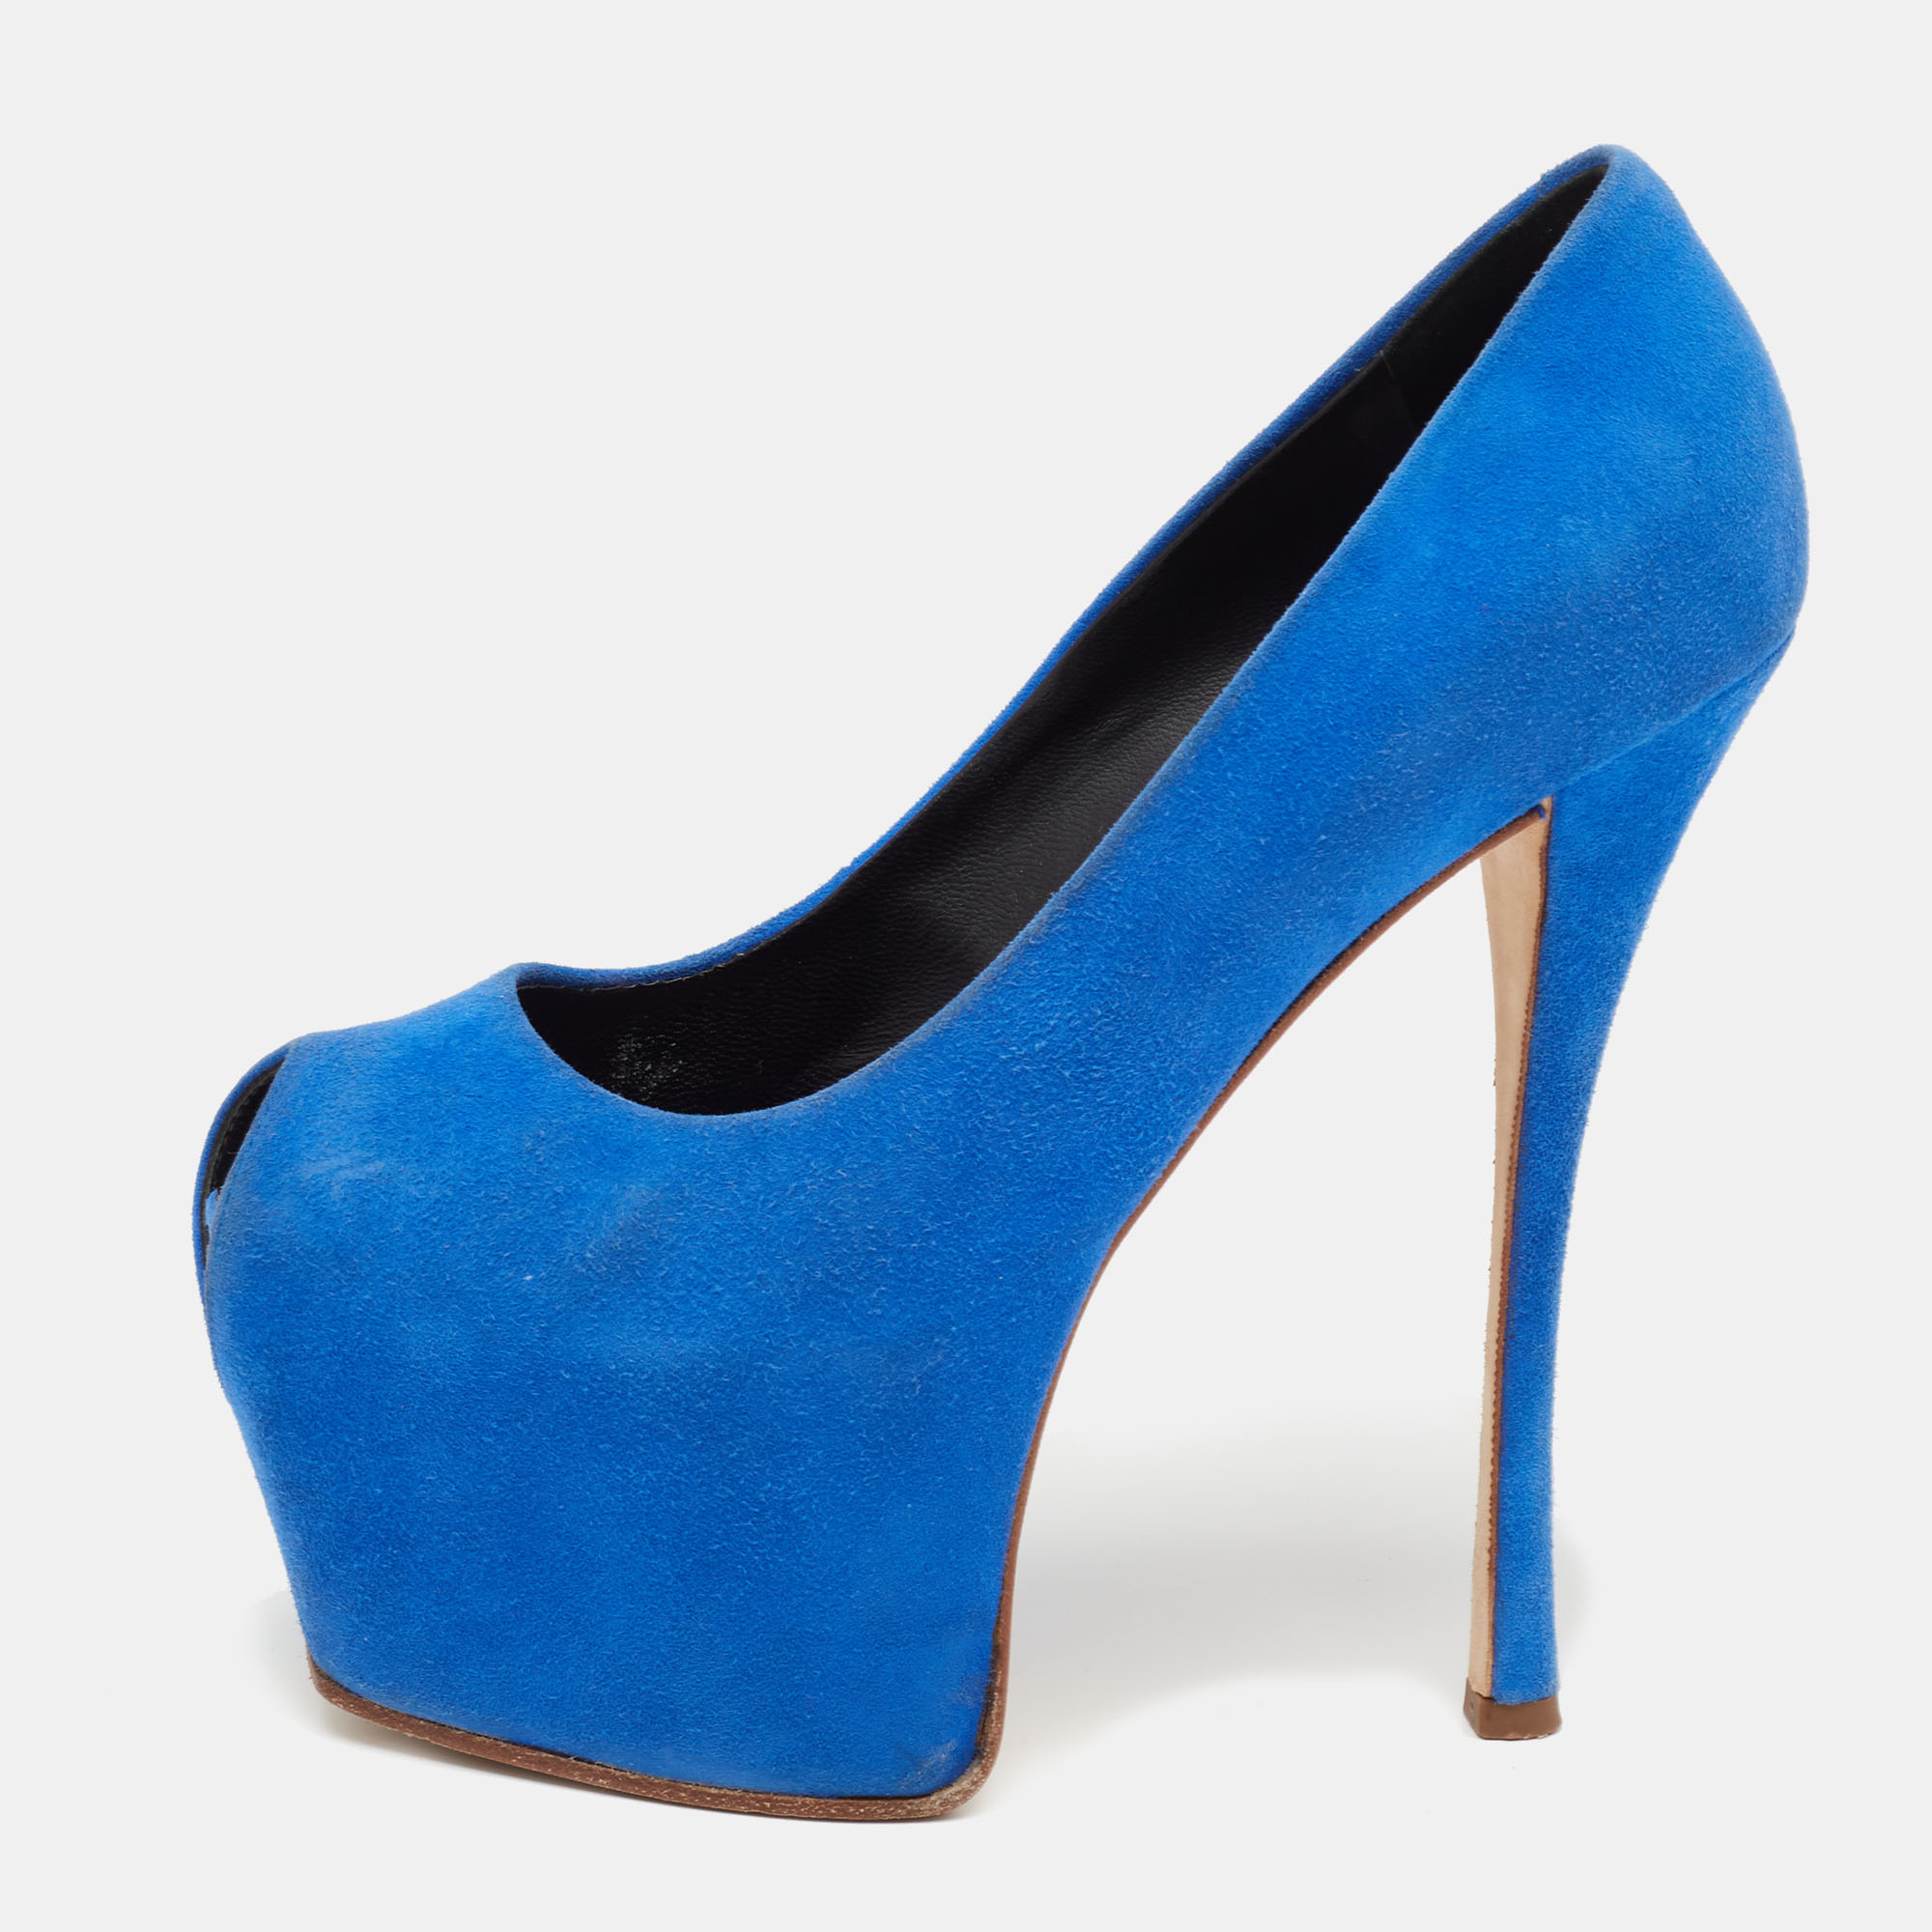 You can never go wrong with these stunning Giuseppe Zanotti pumps. Crafted in Italy they are made from suede and come in a lovely shade of blue. They are styled with peep toes platforms 15 cm heels and a good fit. They are finished with leather insoles and soles.